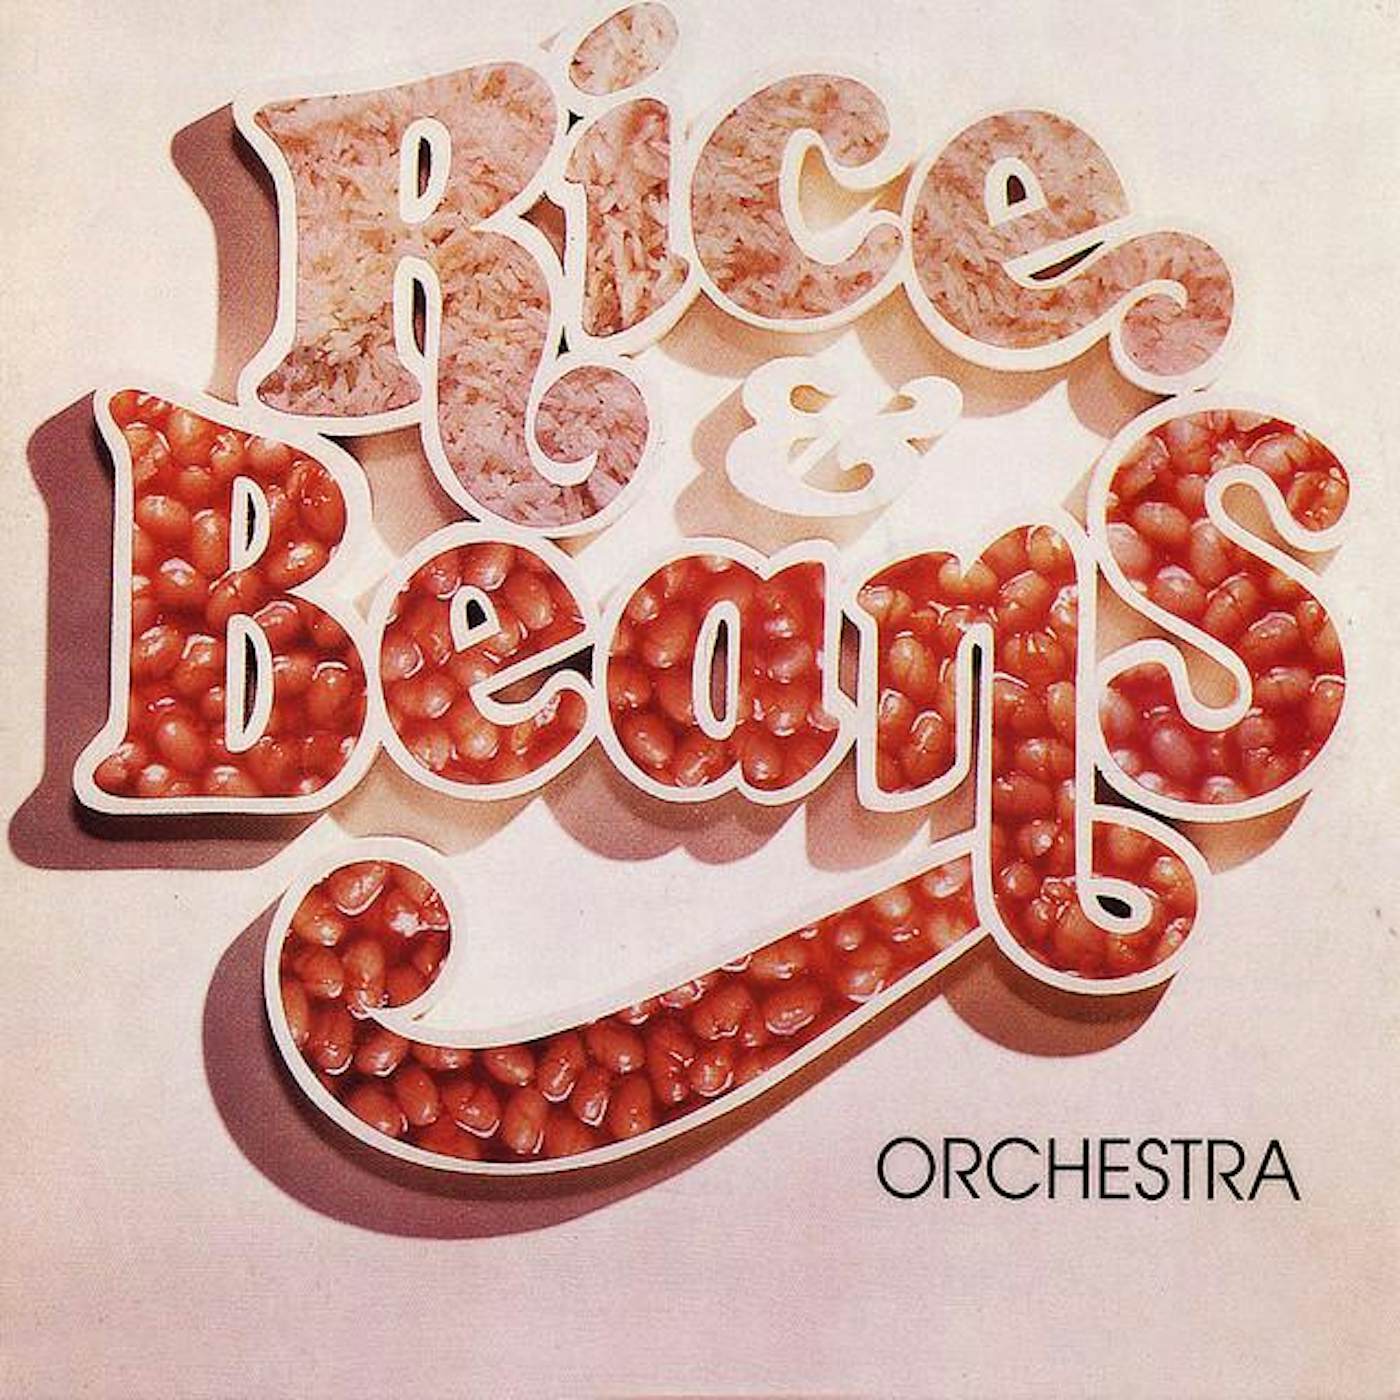 Rice & Beans Orchestra